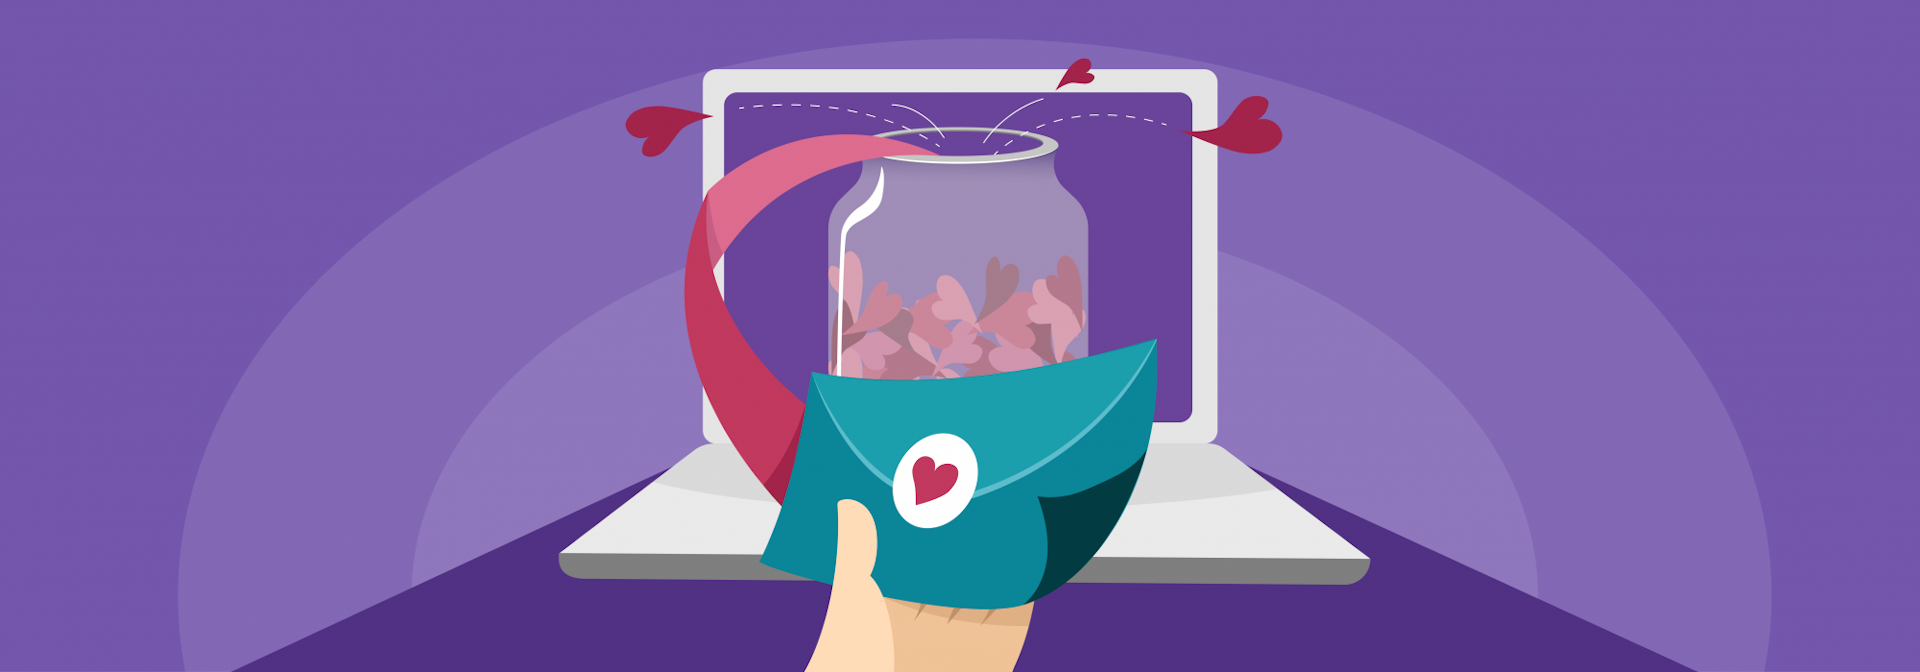 A jar containing love hearts perched on a laptop with someone holding an envelope in the foreground. 